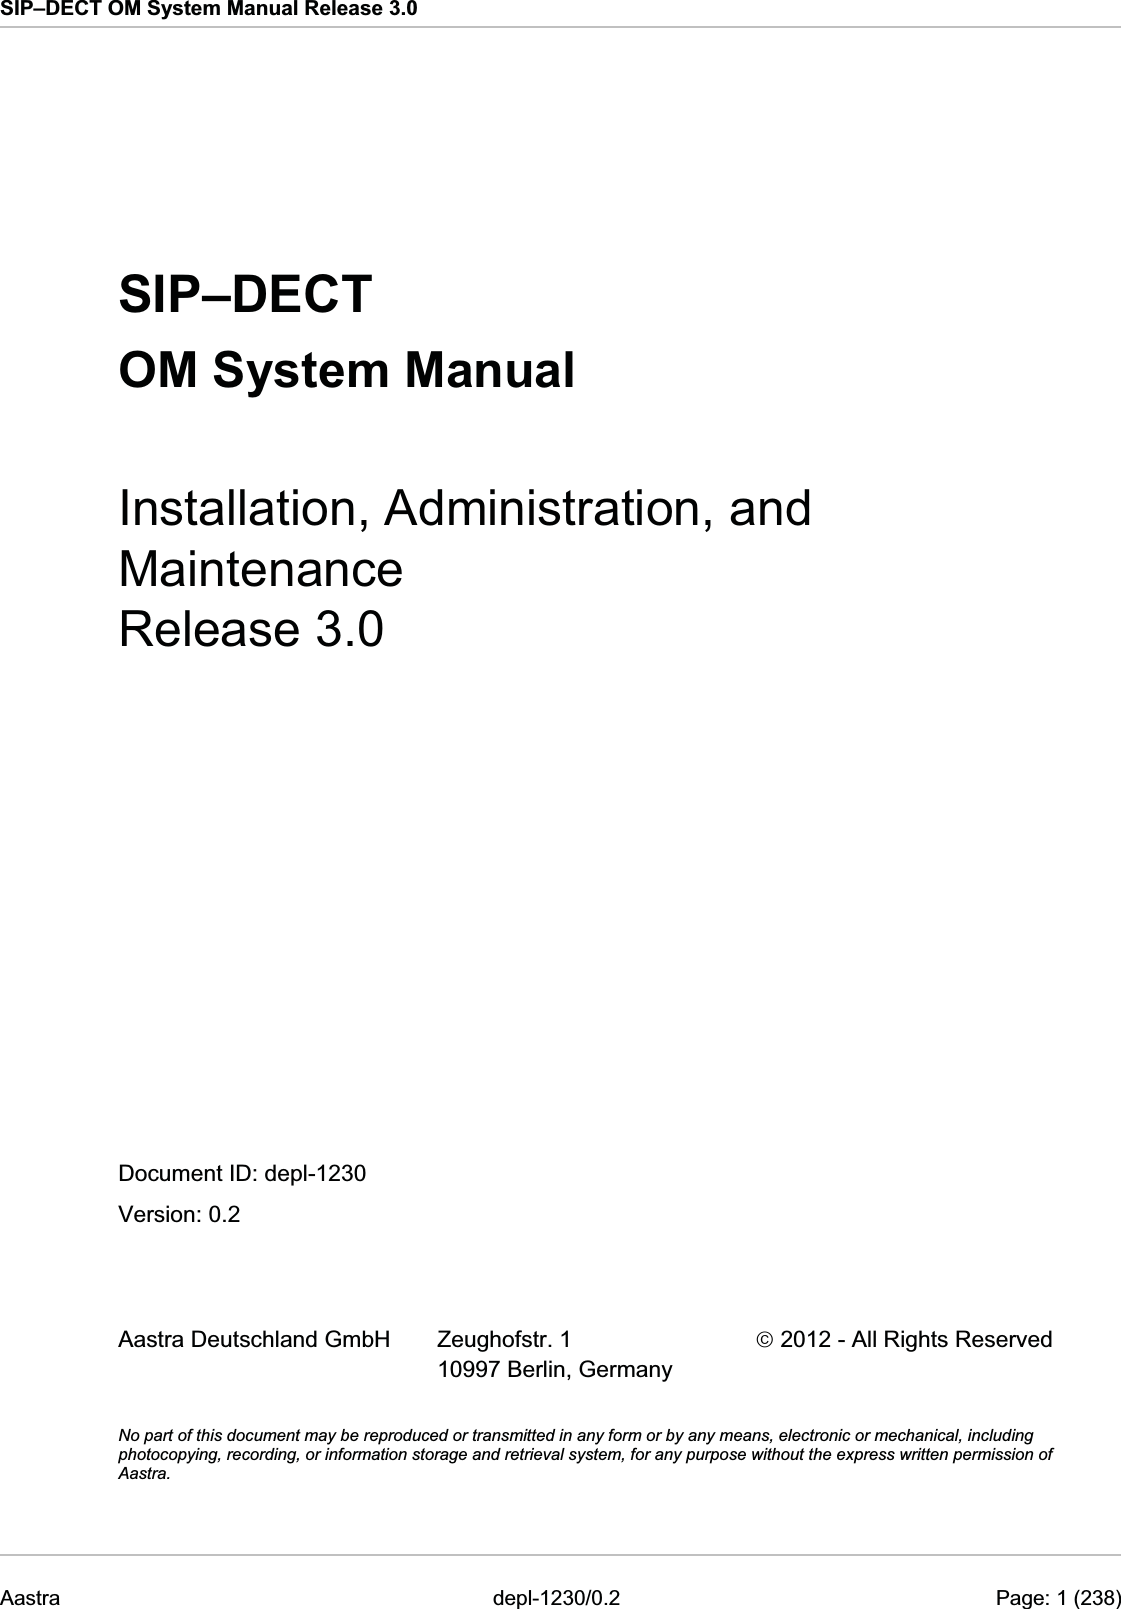 SIP–DECT OM System Manual Release 3.0   SIP–DECT OM System Manual Installation, Administration, and Maintenance Release 3.0  Document ID: depl-1230 Version: 0.2   Aastra Deutschland GmbH  Zeughofstr. 1 10997 Berlin, Germany ¤ 2012 - All Rights Reserved  No part of this document may be reproduced or transmitted in any form or by any means, electronic or mechanical, including photocopying, recording, or information storage and retrieval system, for any purpose without the express written permission of Aastra. Aastra  depl-1230/0.2    Page: 1 (238) 